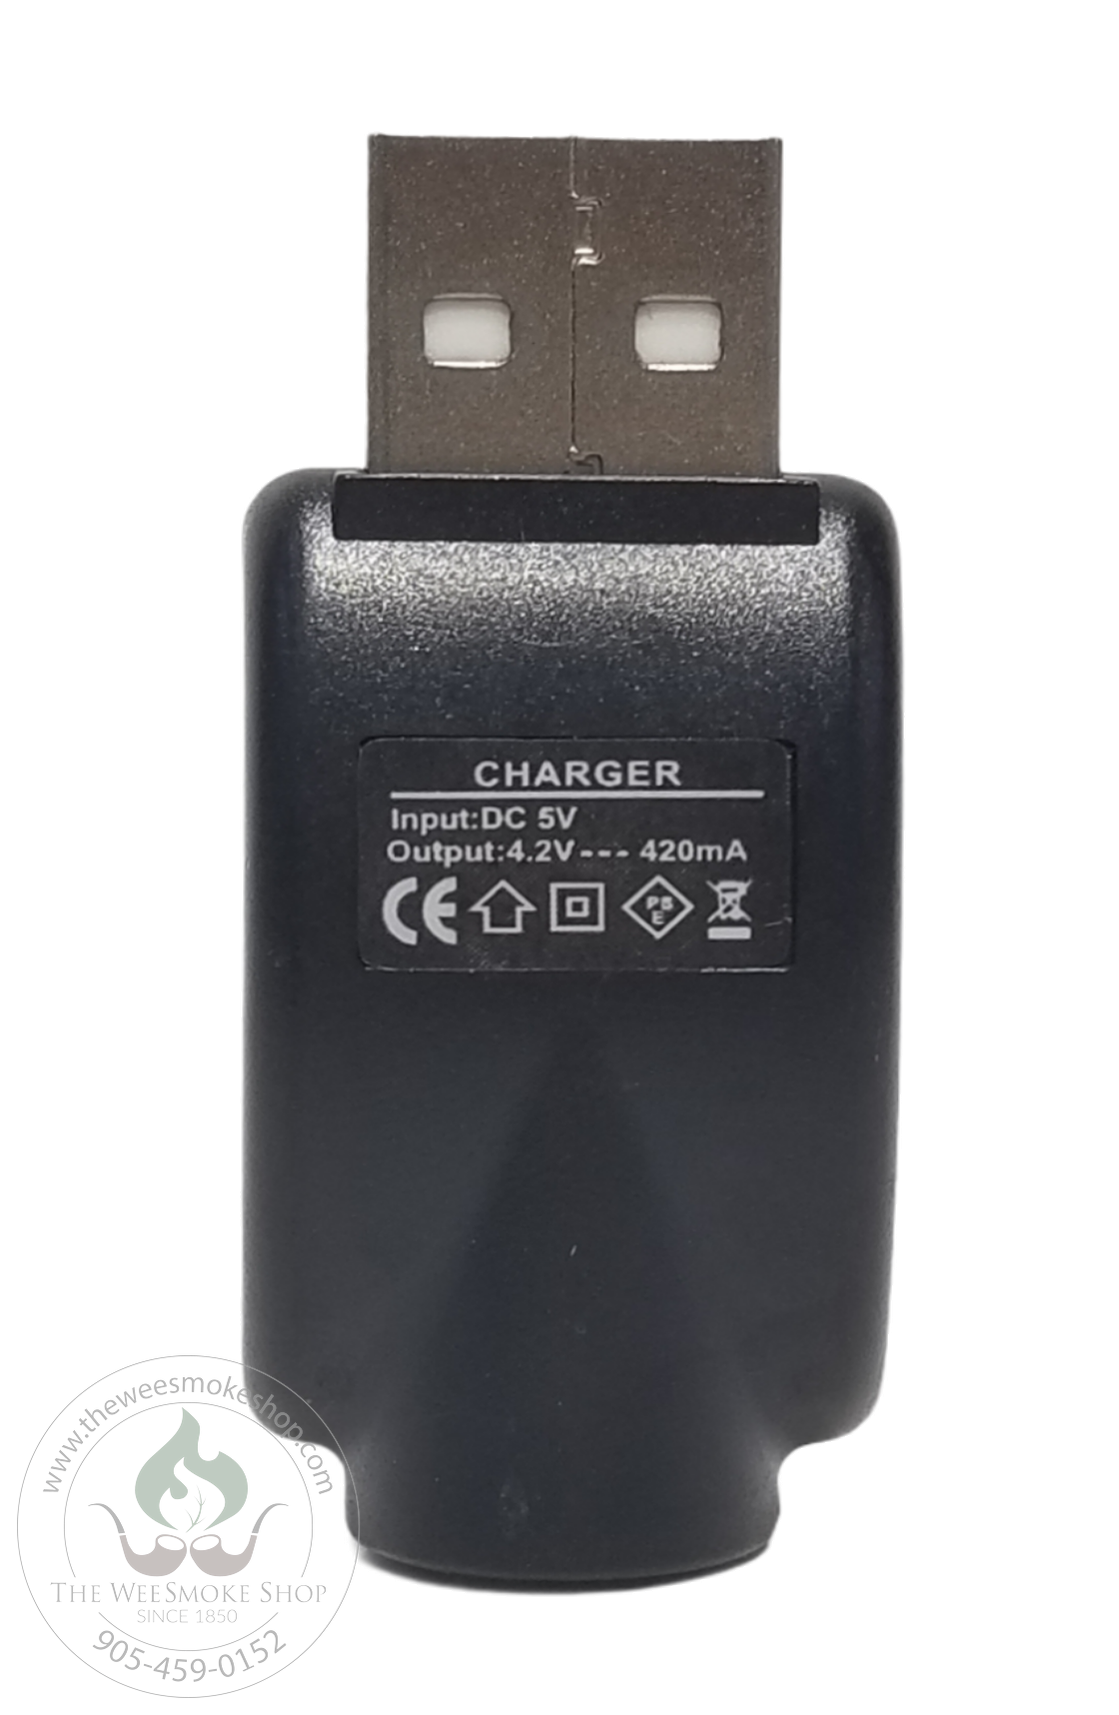 USB Charger  510 Male Thread